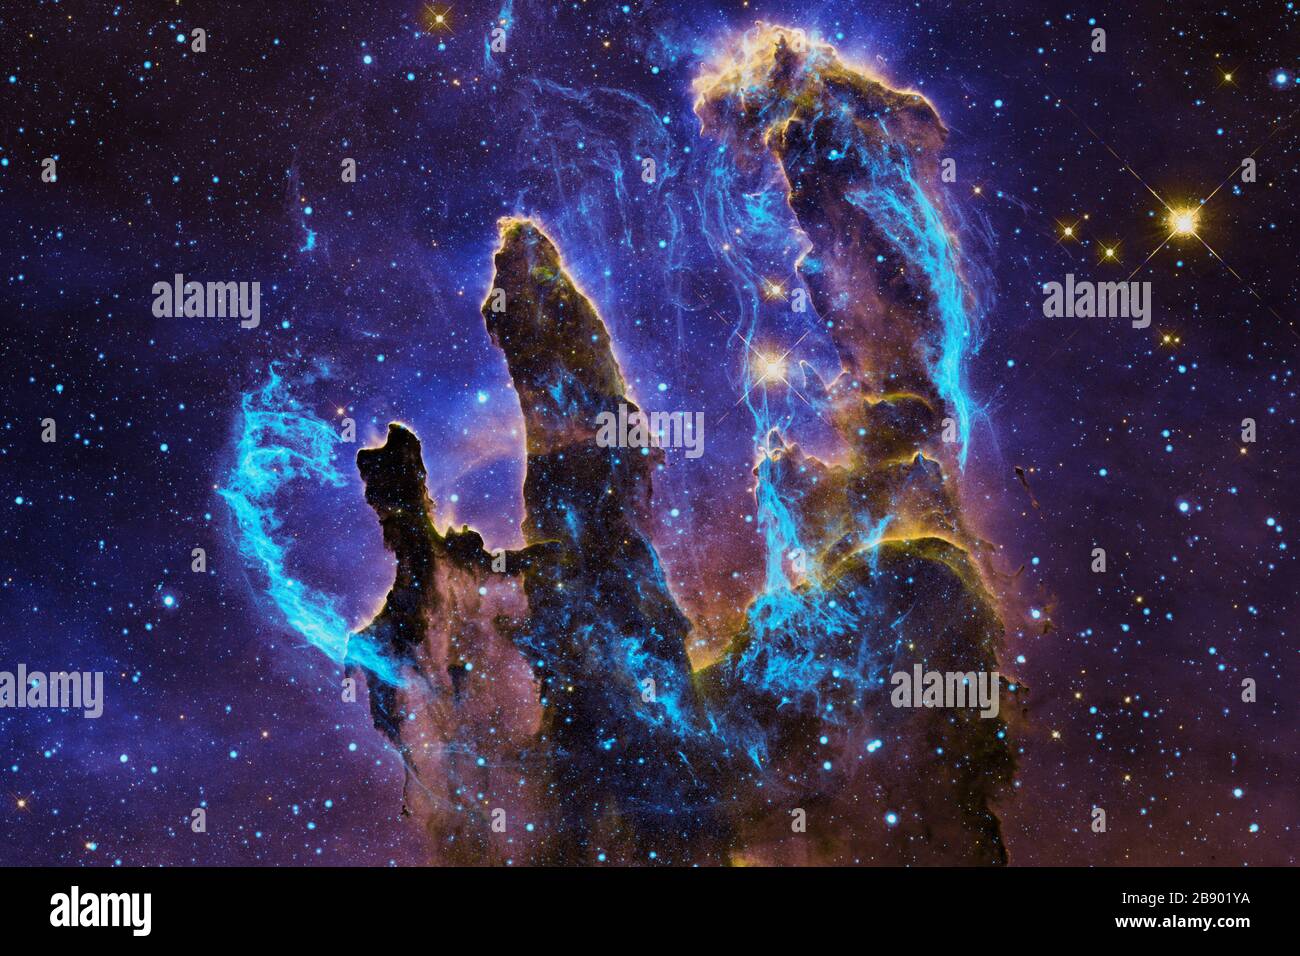 Universe scene with stars and galaxies in deep space showing the